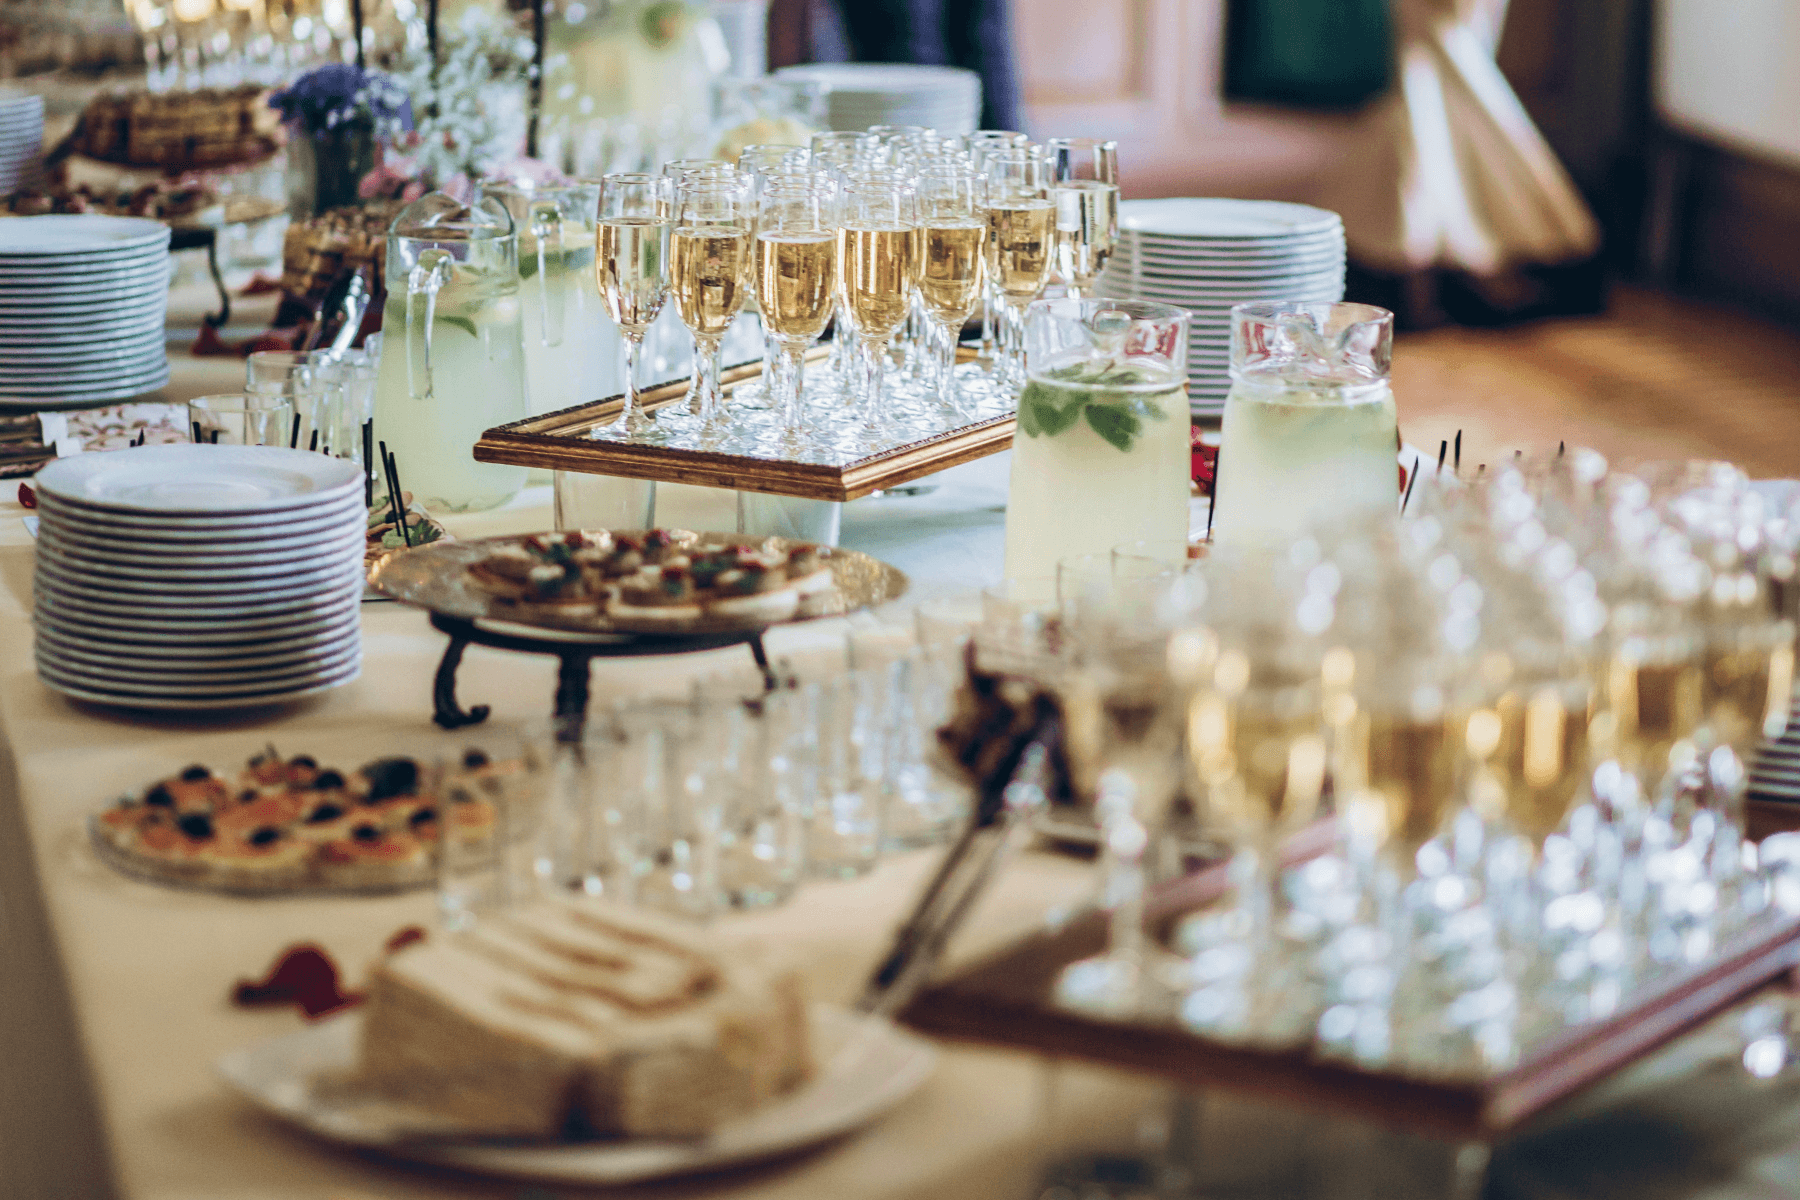 A banquet table is covered in stacked dishes, Champagne flutes, and passed hors d'oeuvres ready to be served.